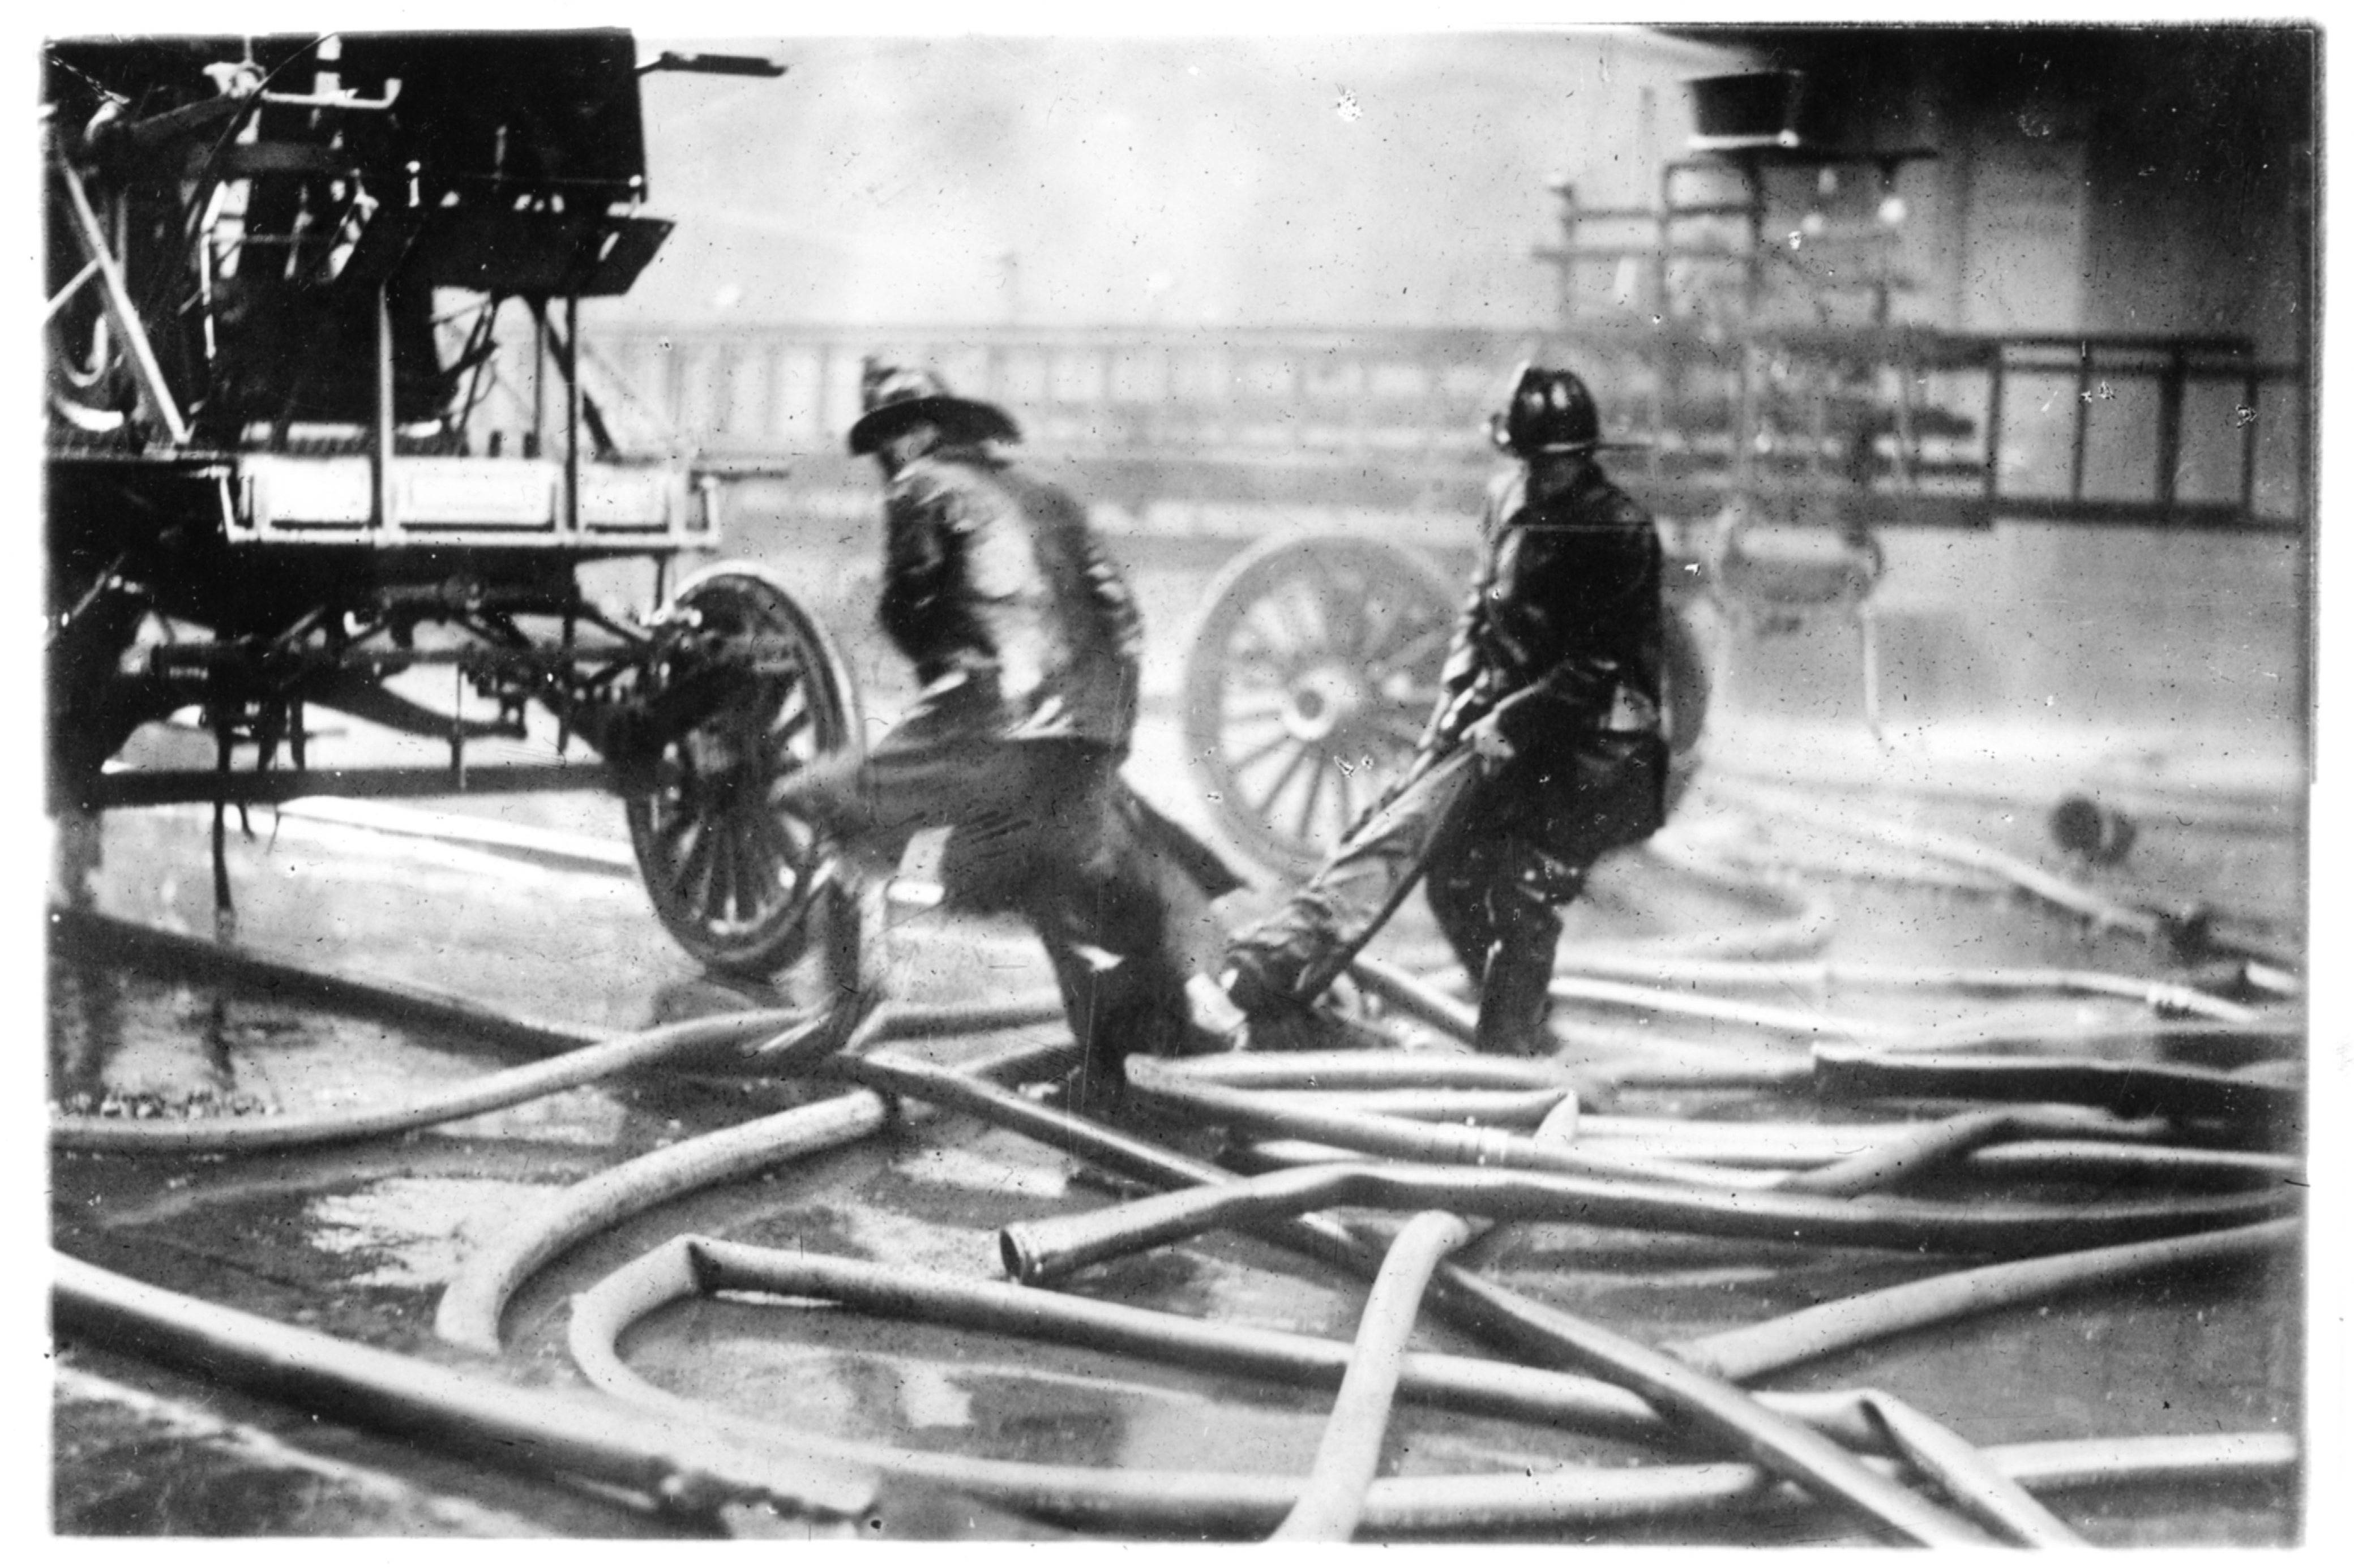 Fire Fighters Carrying a Victim of the Triangle Shirtwaist Factory Fire, March 25th, 1911.